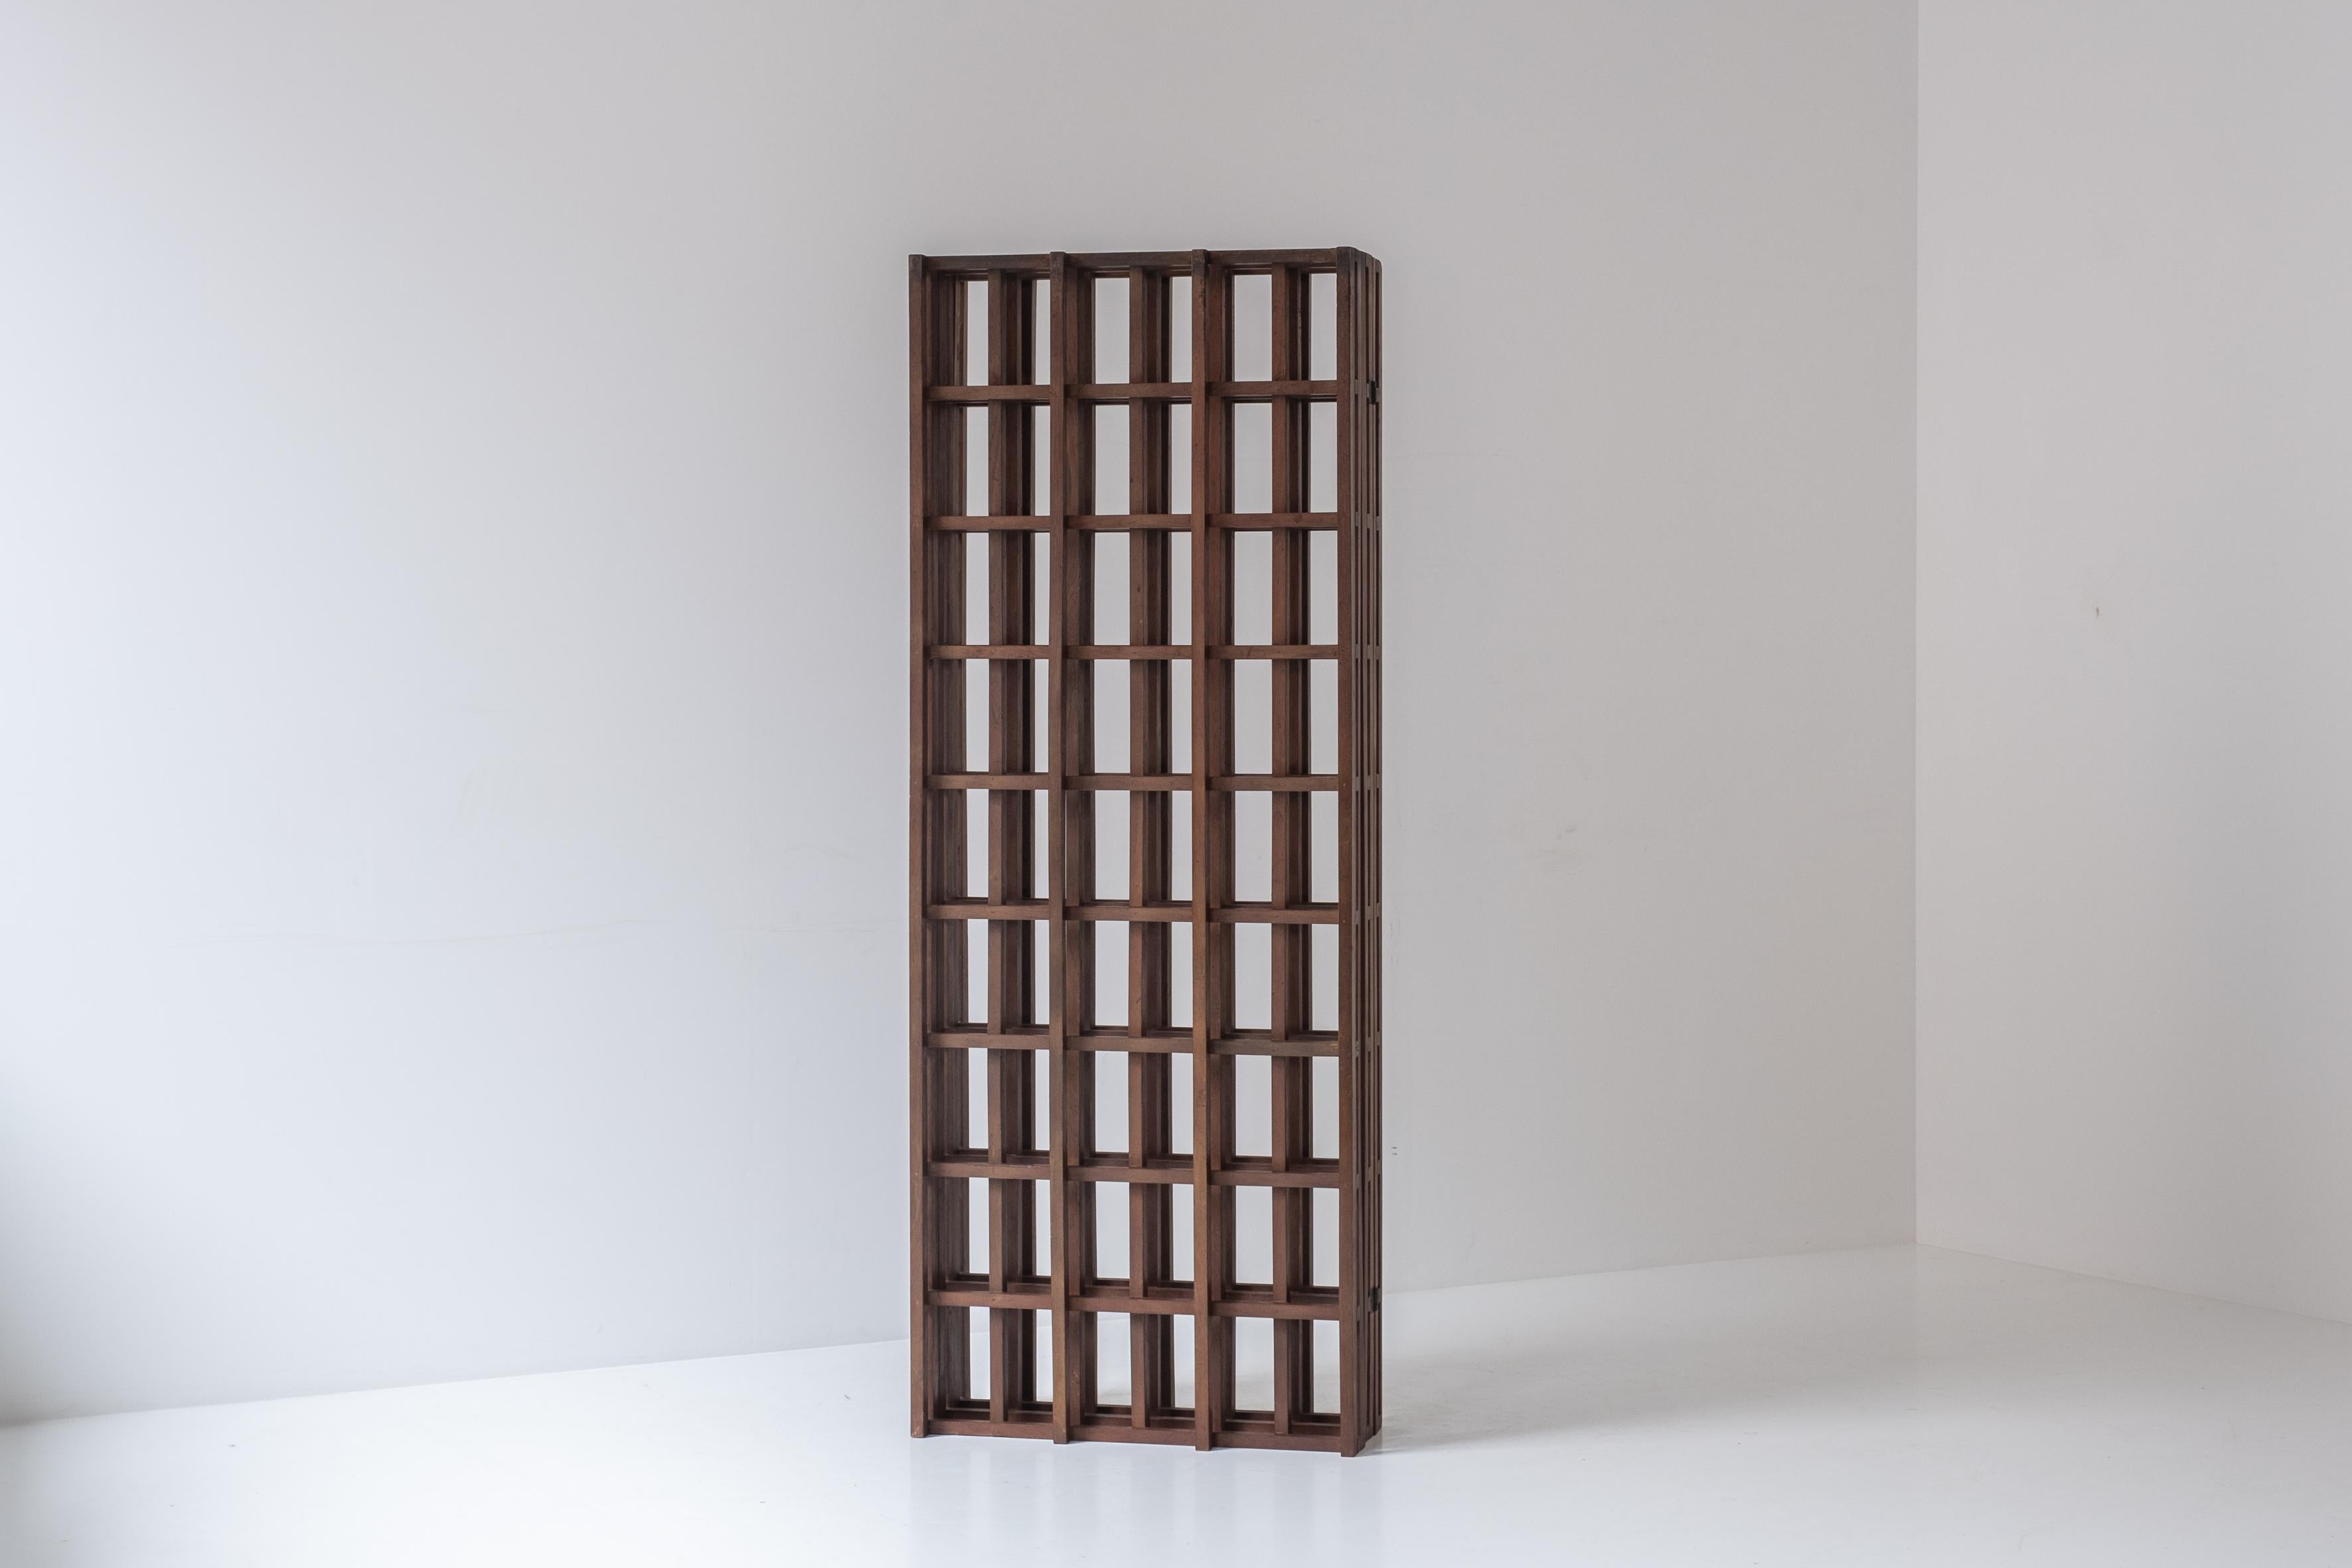 Sculptural room divider designed and manufactured in Italy during the 1960s. This screen features solid teak slats and add a very nice sculptural and Modernist feeling to the space. Presented in a good original condition.